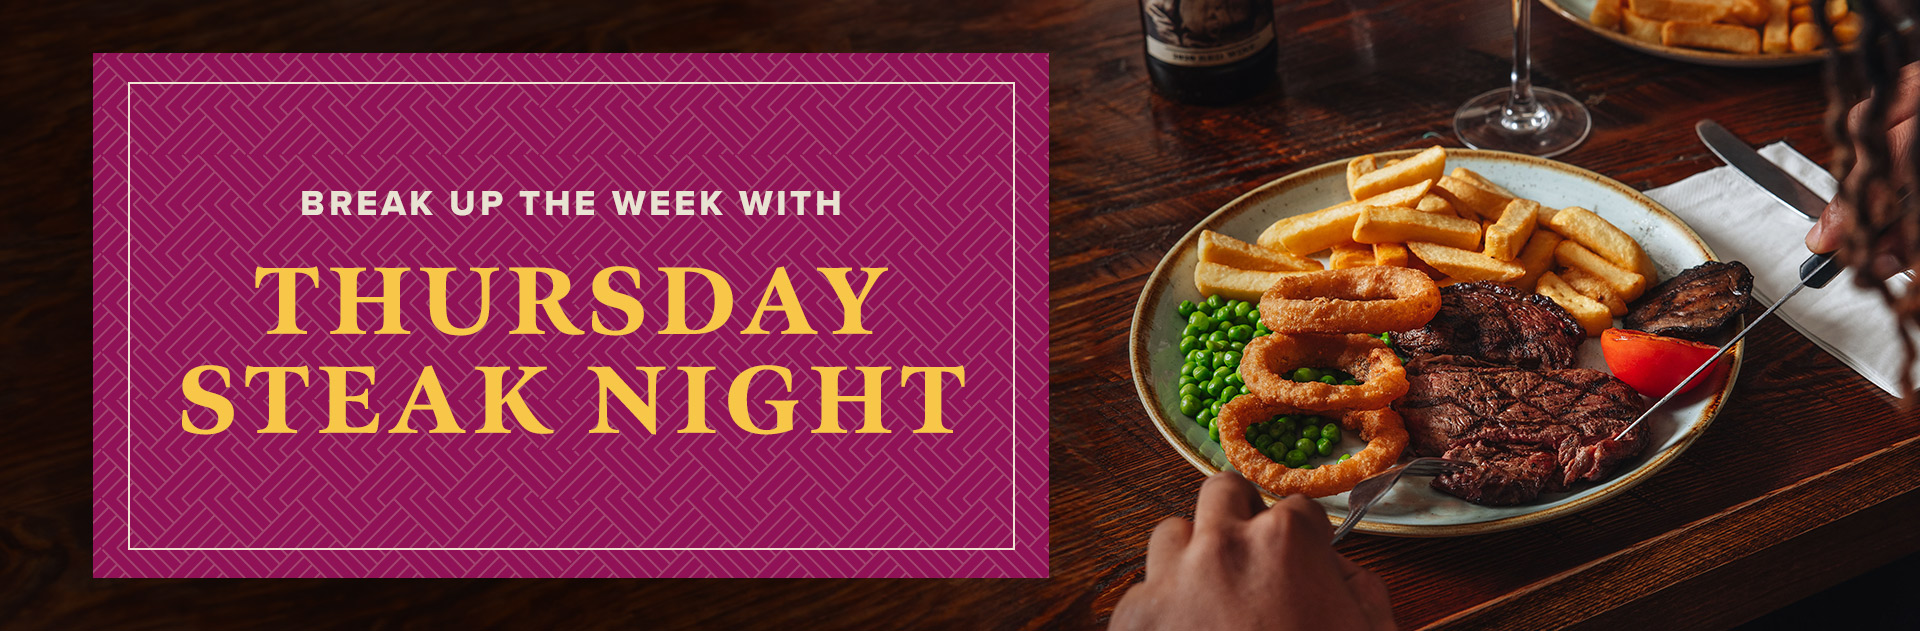 Thursday Steak Night at The Nut and Squirrel